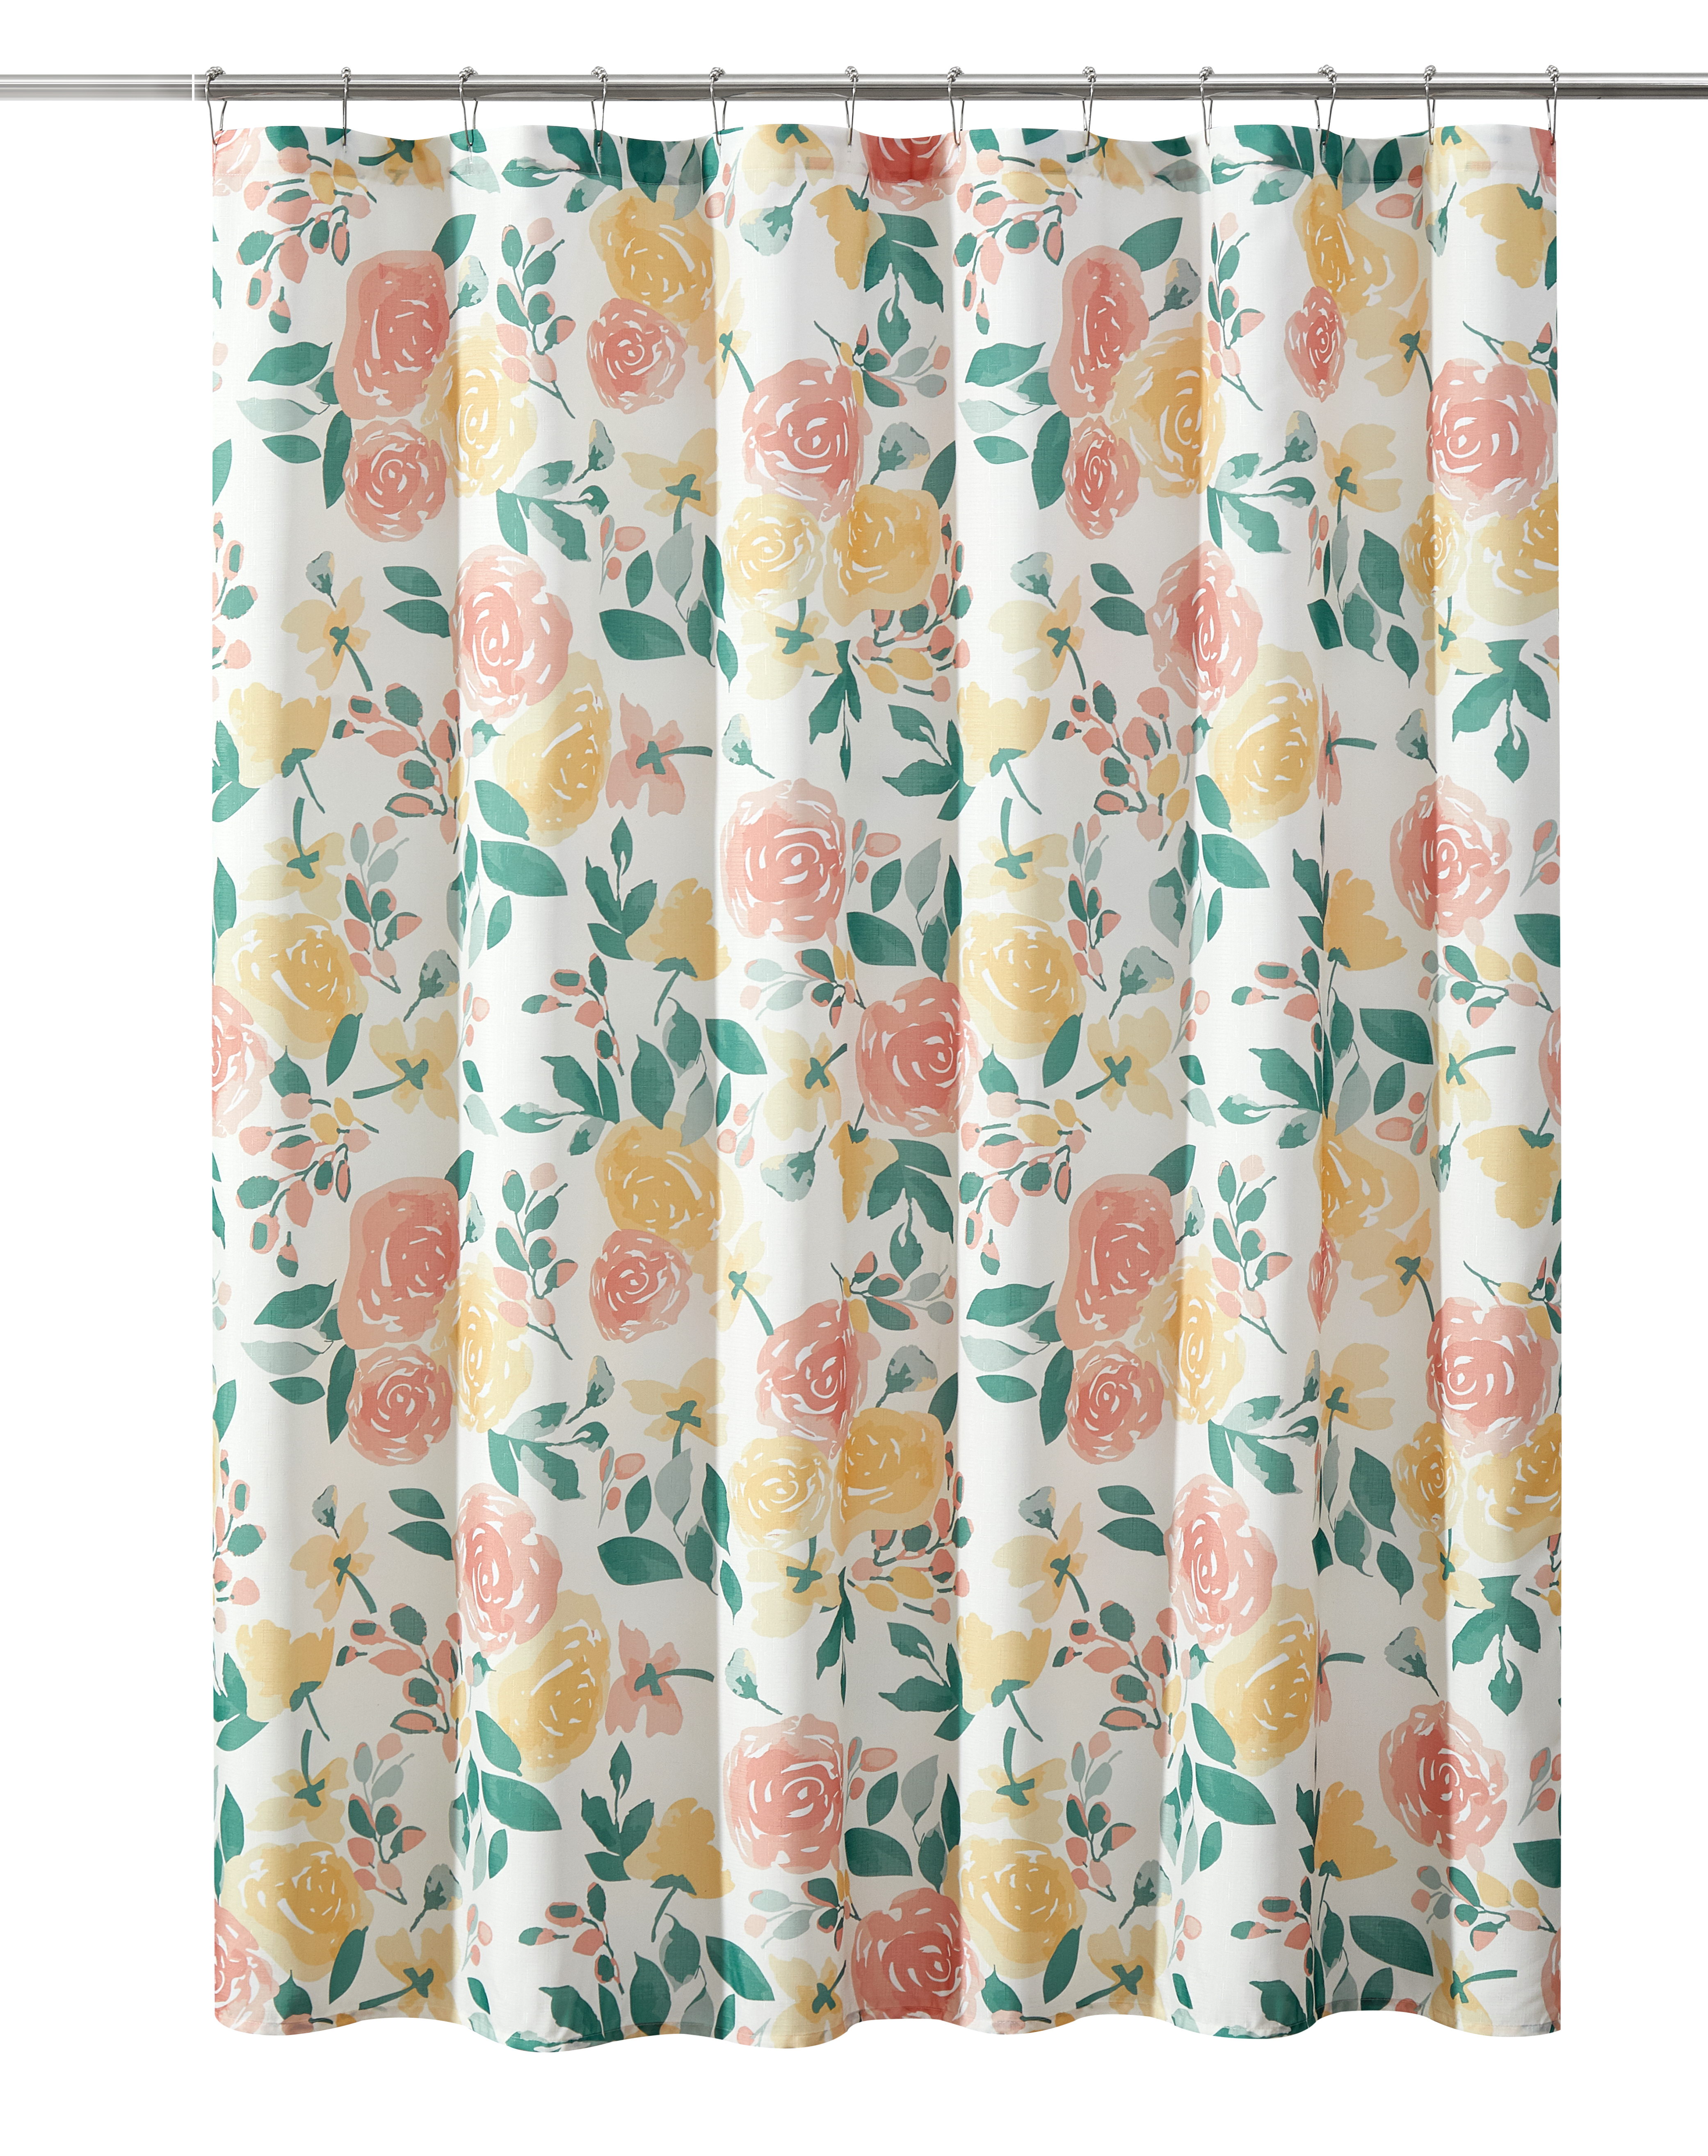 Mainstays Floral Flowers Polyester Shower Curtains, 72" x 72", Pink - image 3 of 5